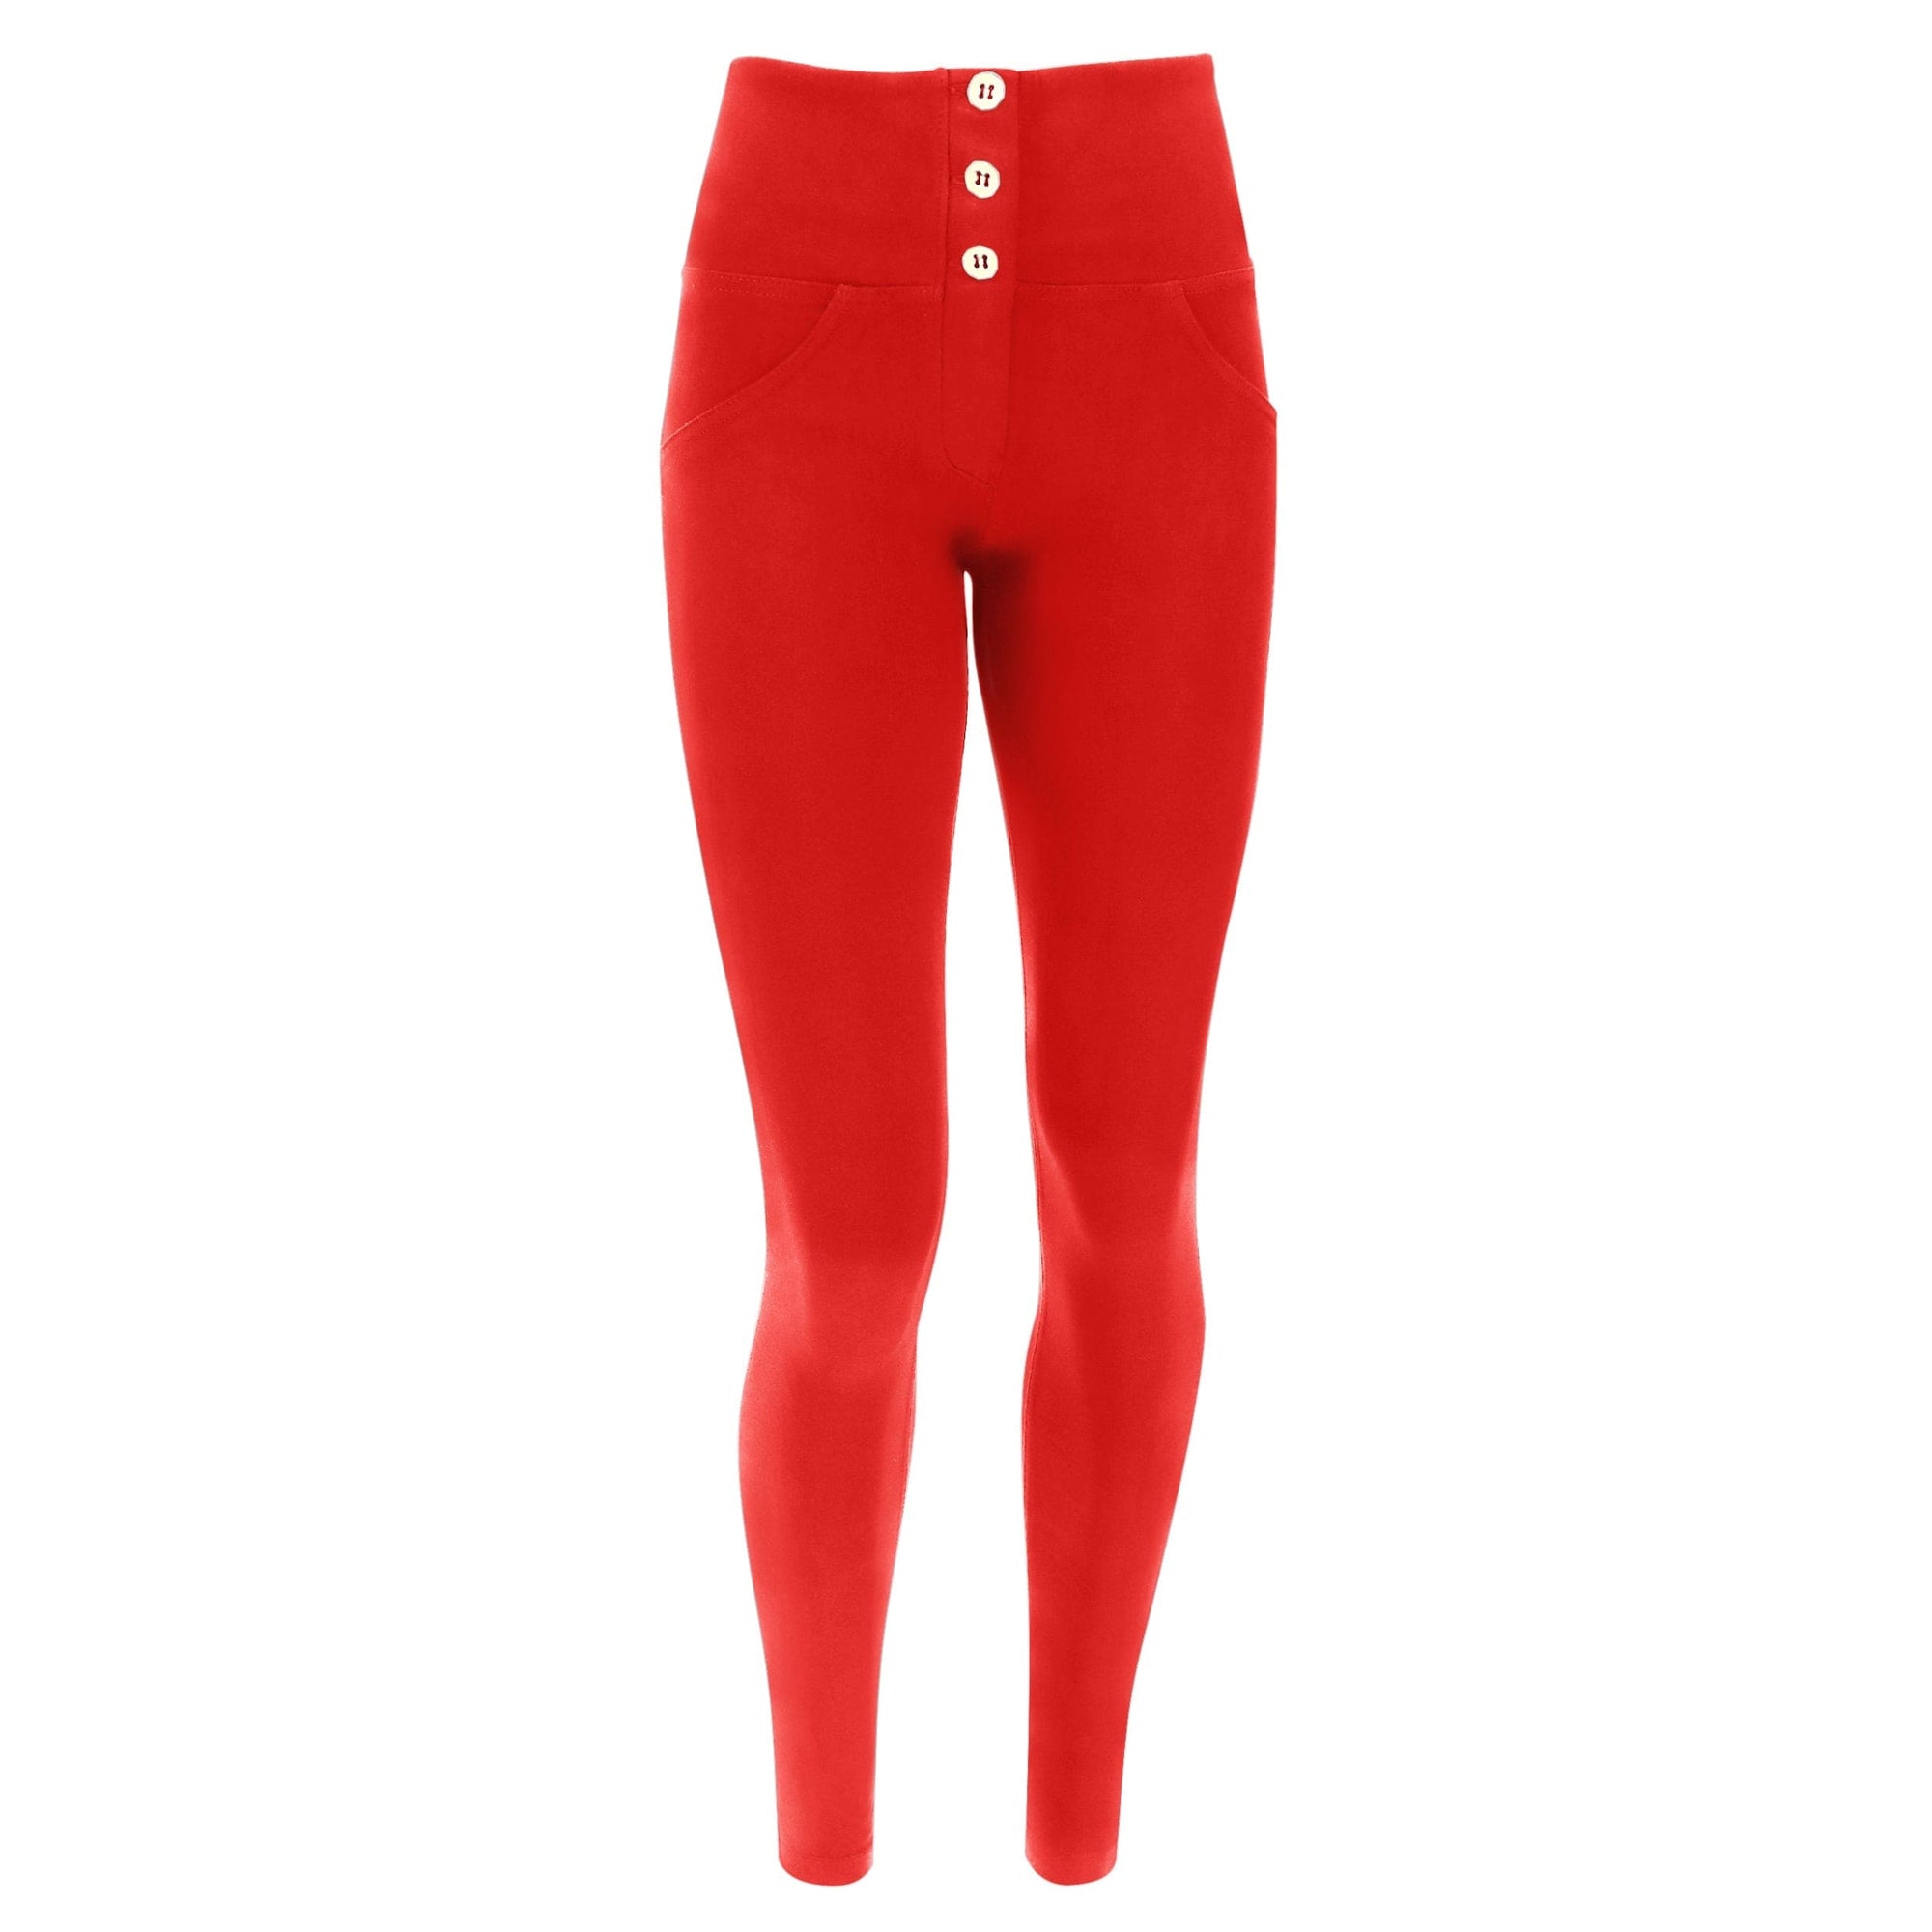 WR.UP® shaping trousers - High waist - Full Length - Chili Pepper 2